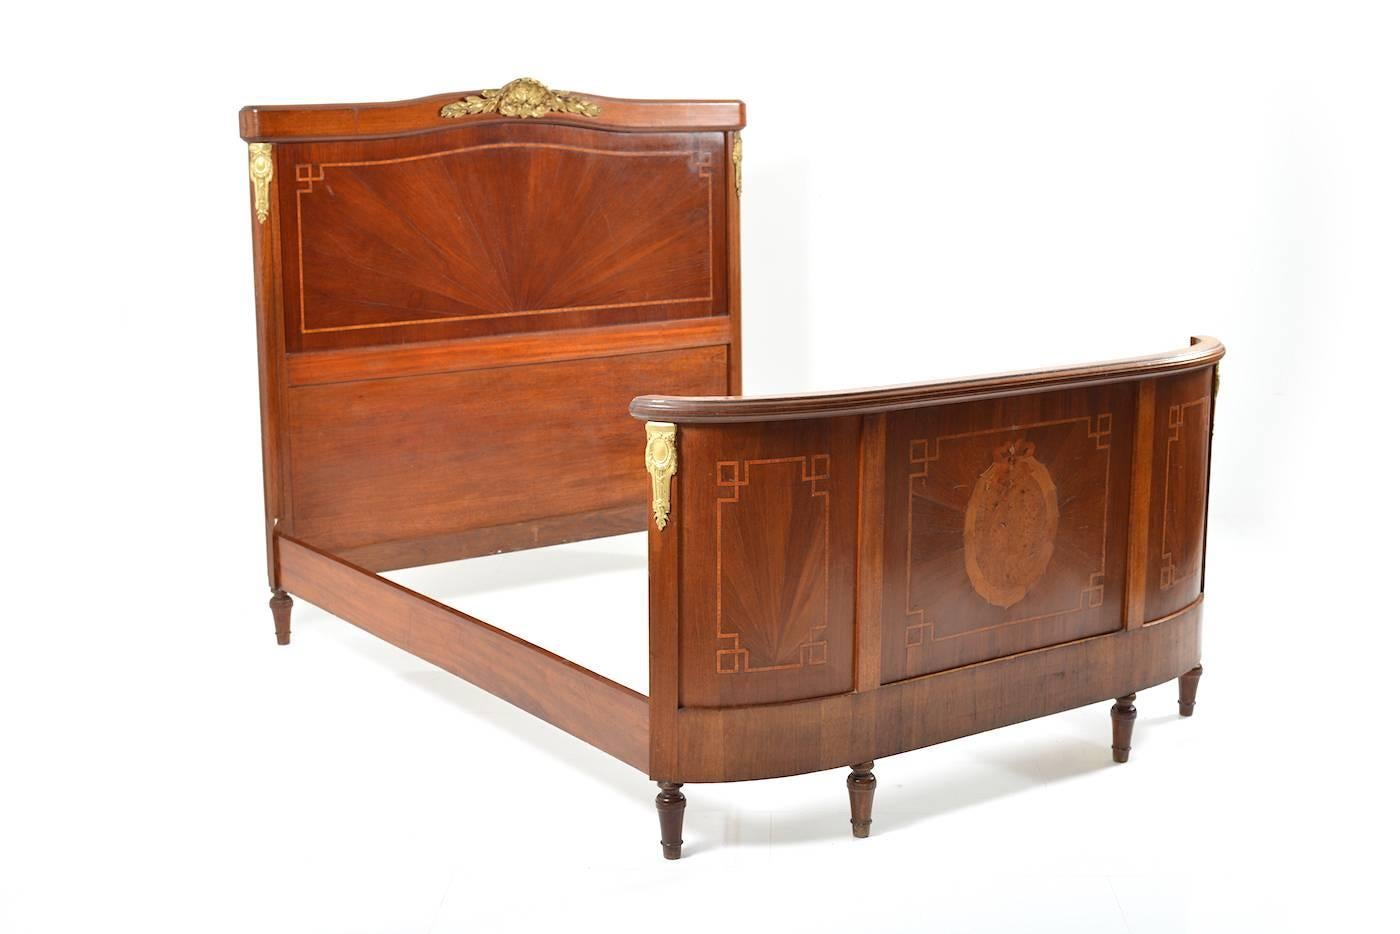 Beautiful French double-bed, 19th century, circa 1860. Mahogany massive and veneer. Marquetry in birch wood and walnut. Original fire-gilded bronze fittings.
In good antique stand, with use of trace and old patina.
  